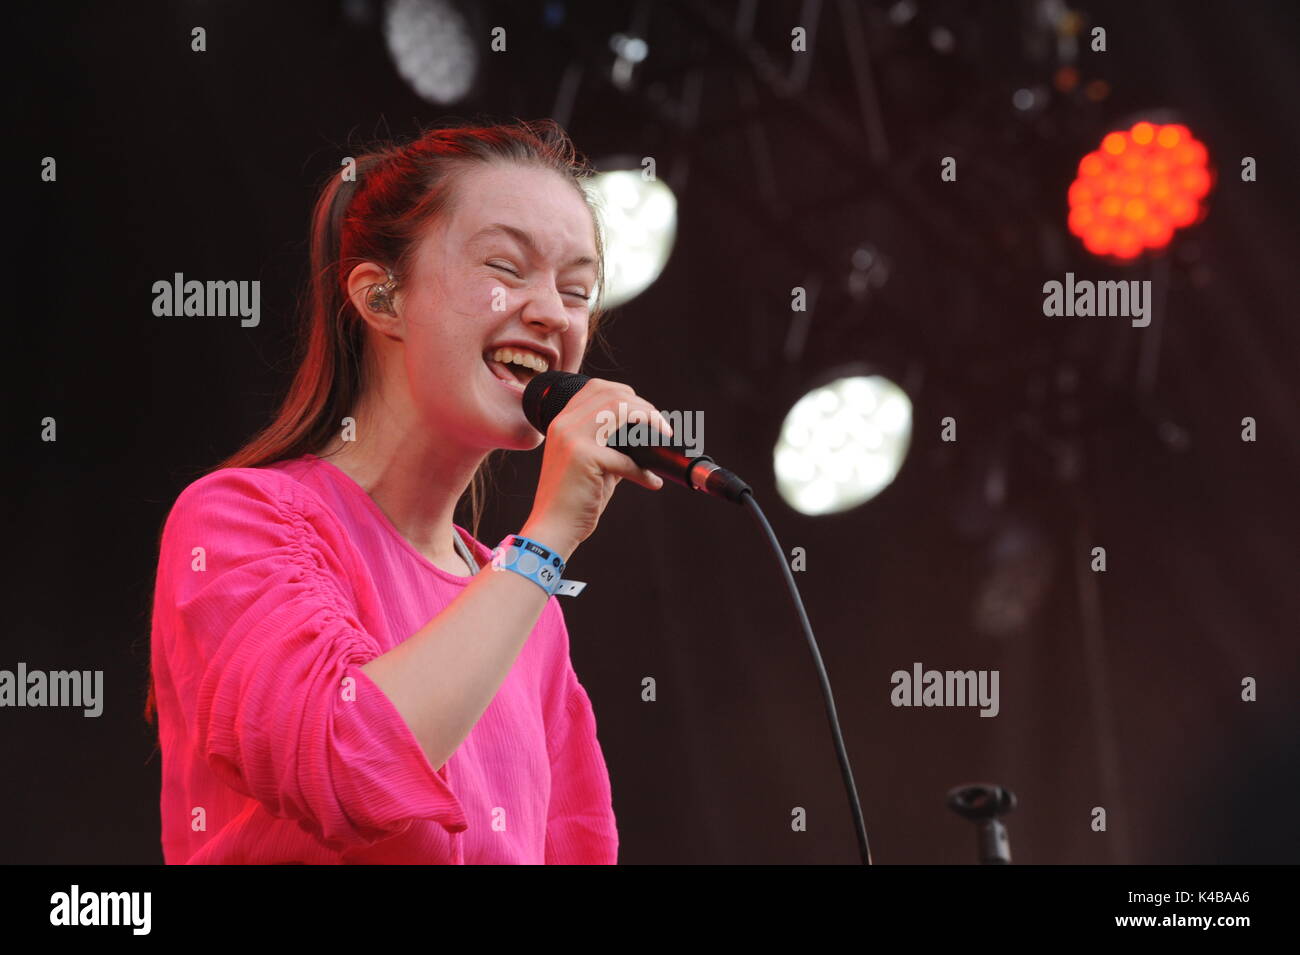 Oslo, Norway. 10th Aug, 2017. The Norwegian singer Sigrid Solbakk Raabe performs at the Oyafestival in Oslo, Norway, 10 August 2017. Sigrid's debut song 'Don't kill my vibe' became an international hit within a few weeks. Photo: Sigrid Harms/dpa/Alamy Live News Stock Photo